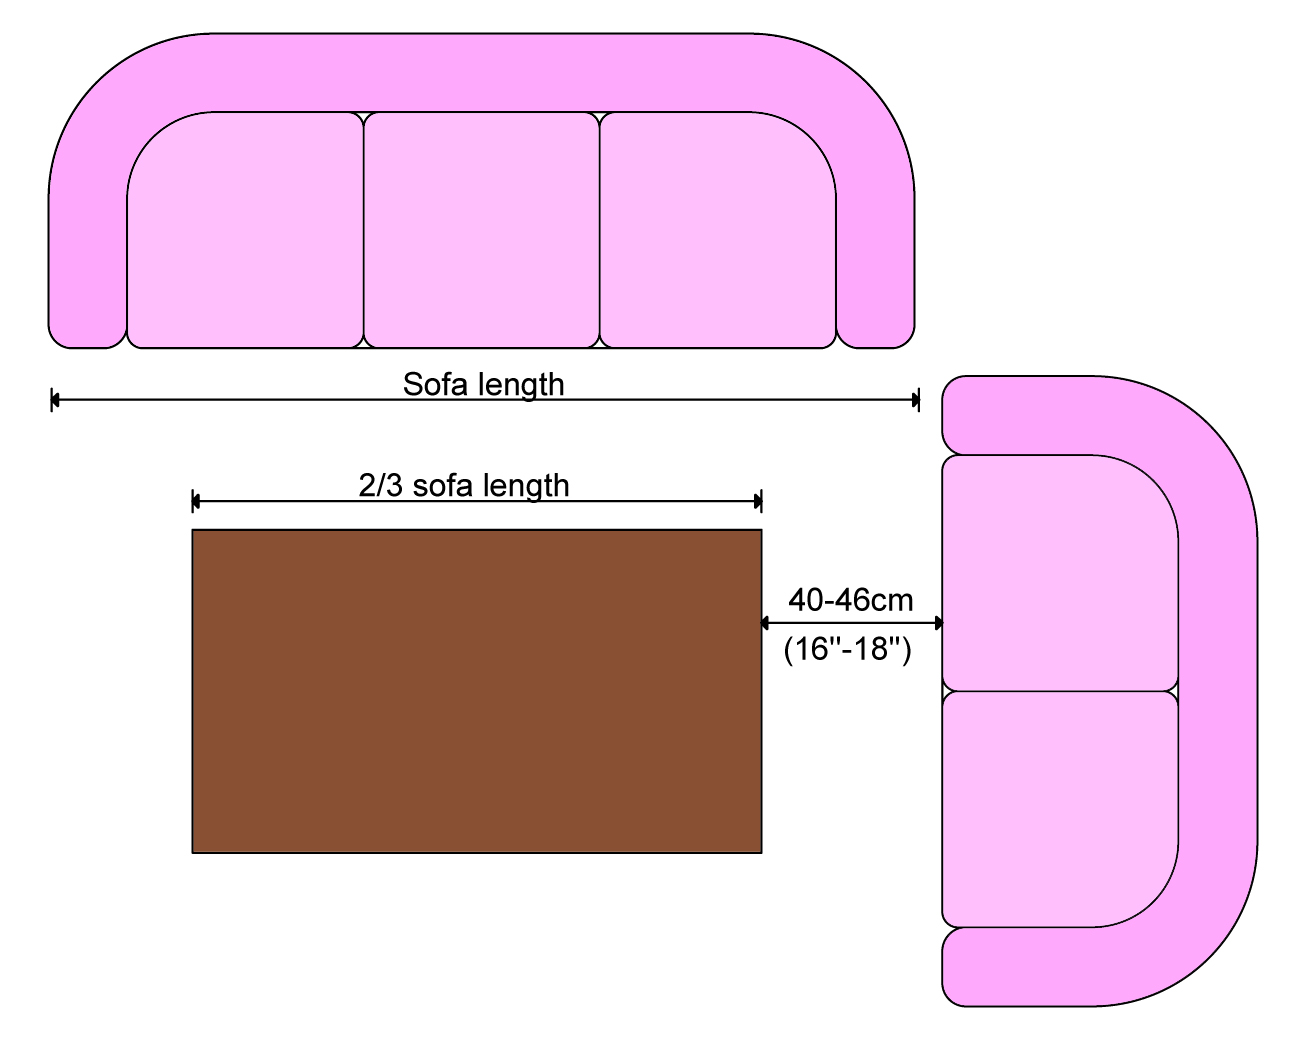 couch table dimensions